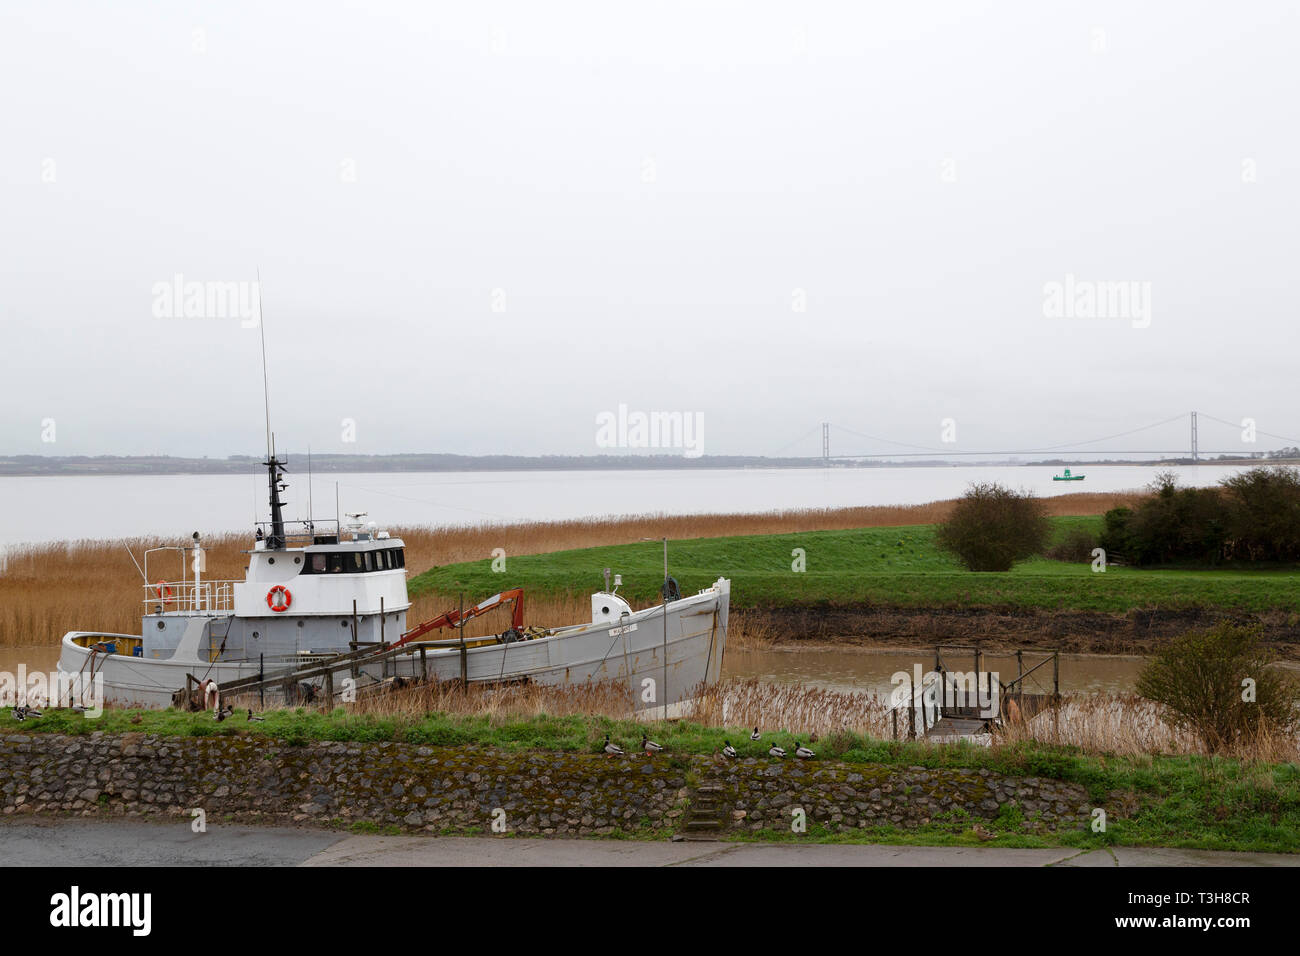 Fishing boat docked by the River Humber in North Lincolnshire. The Humber Bridge can be seen in the distance. Stock Photo